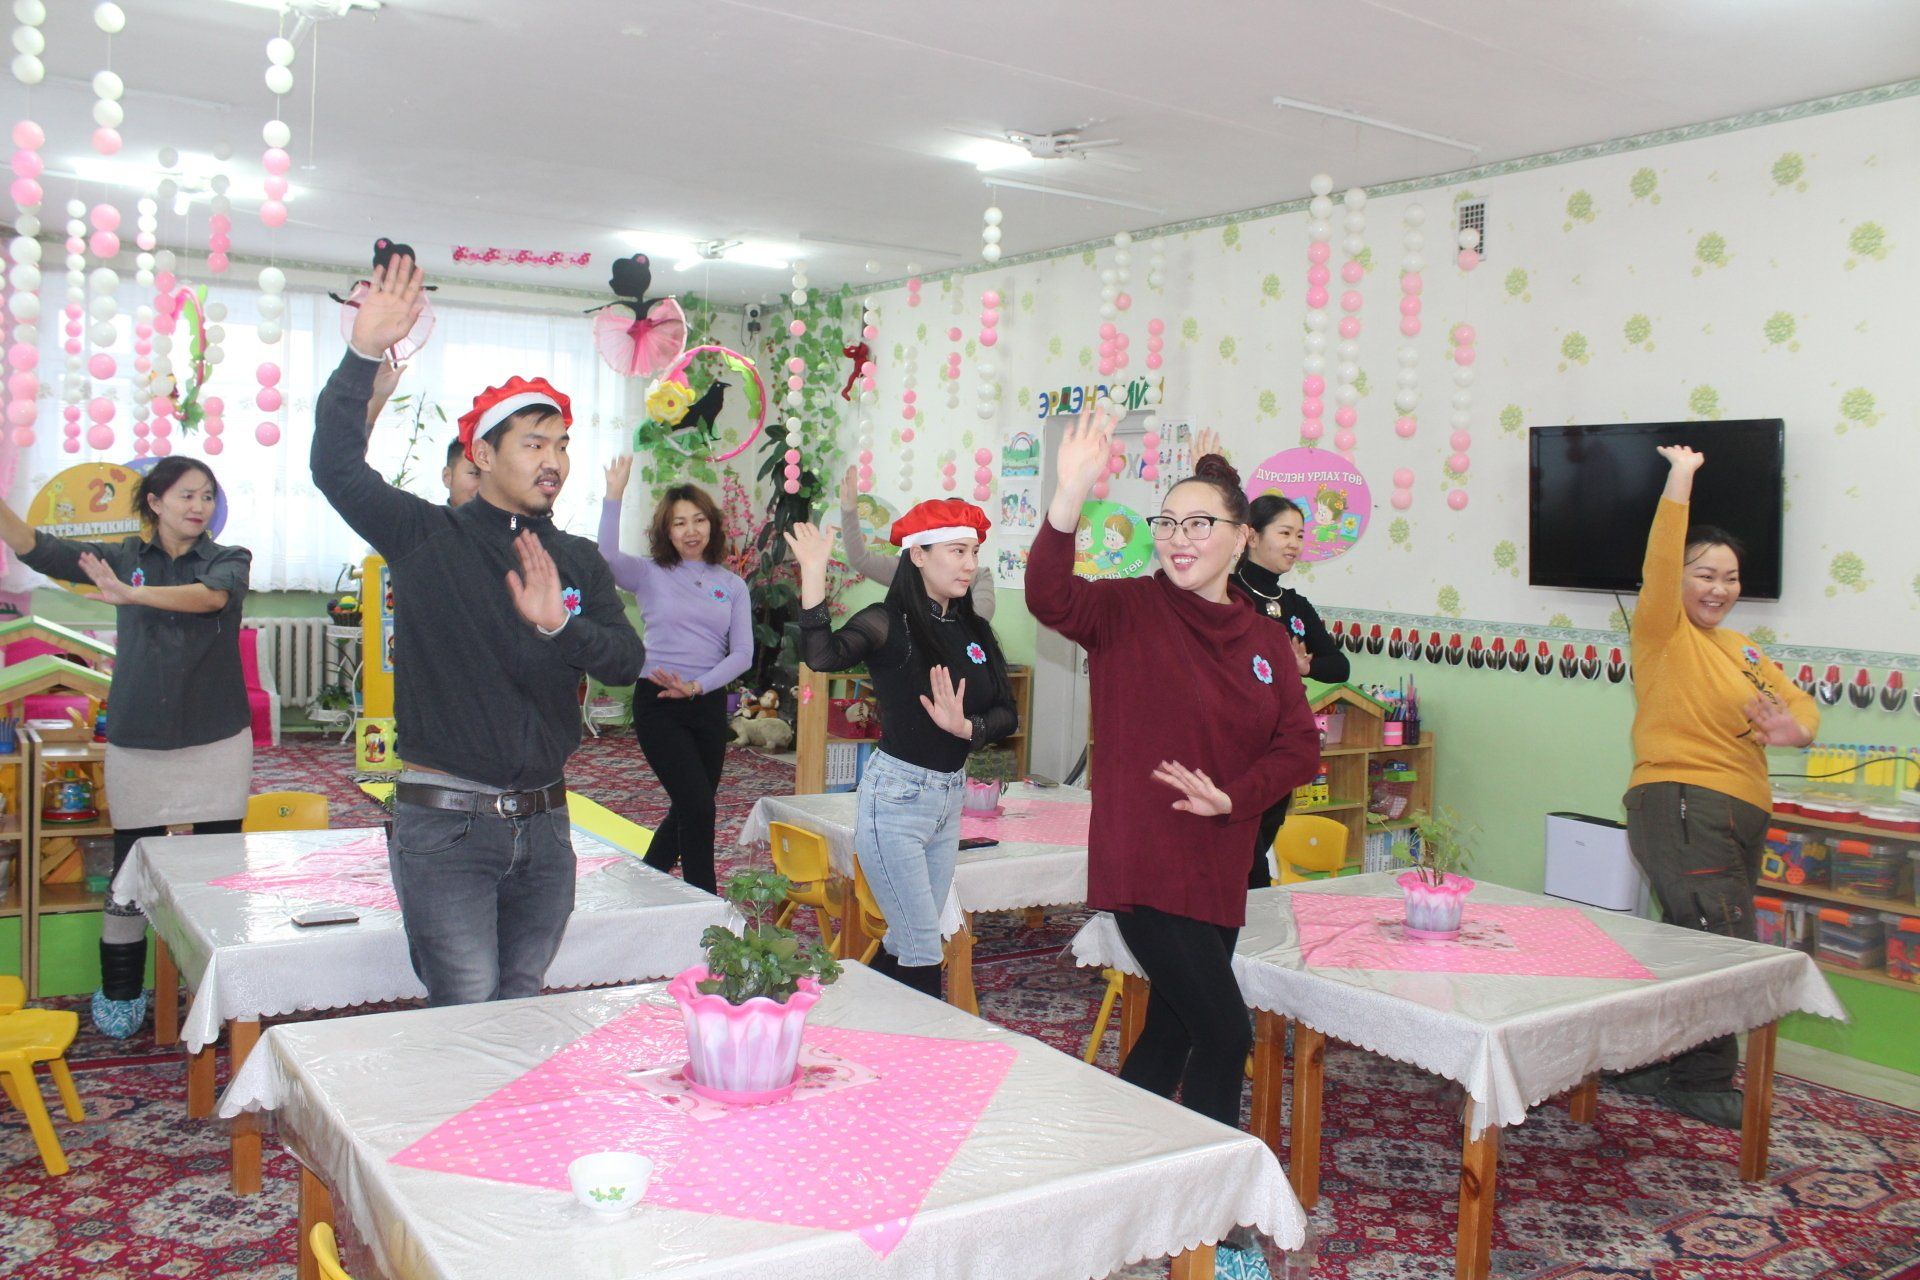 Parents participating in an interactive activity, all dancing with one hand up.